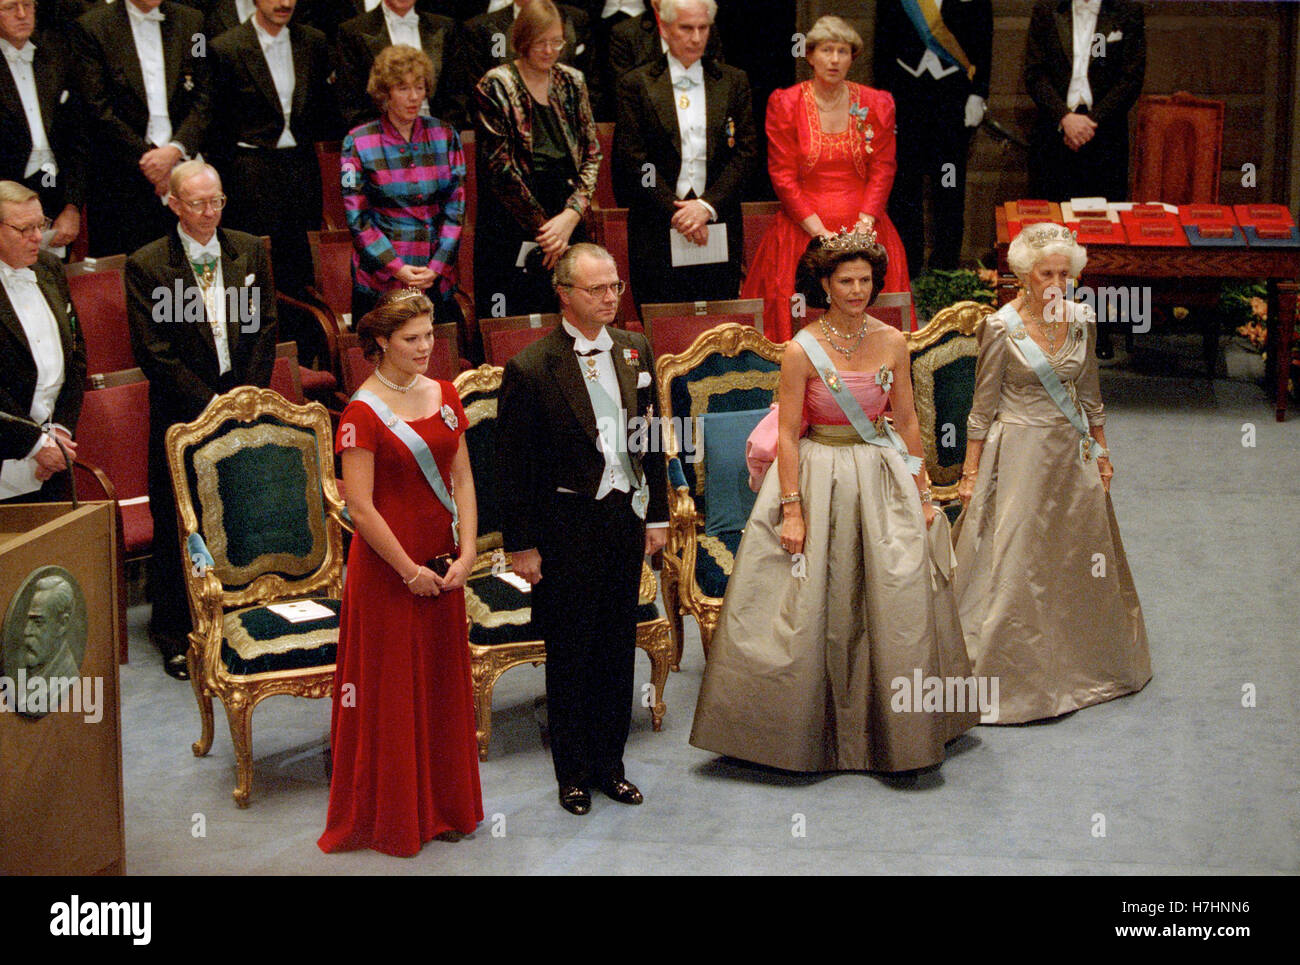 CROWN PRINCESS VICTORIA At the Nobel prize giving ceremony in Stockholm Consert hall 1995 Stock Photo